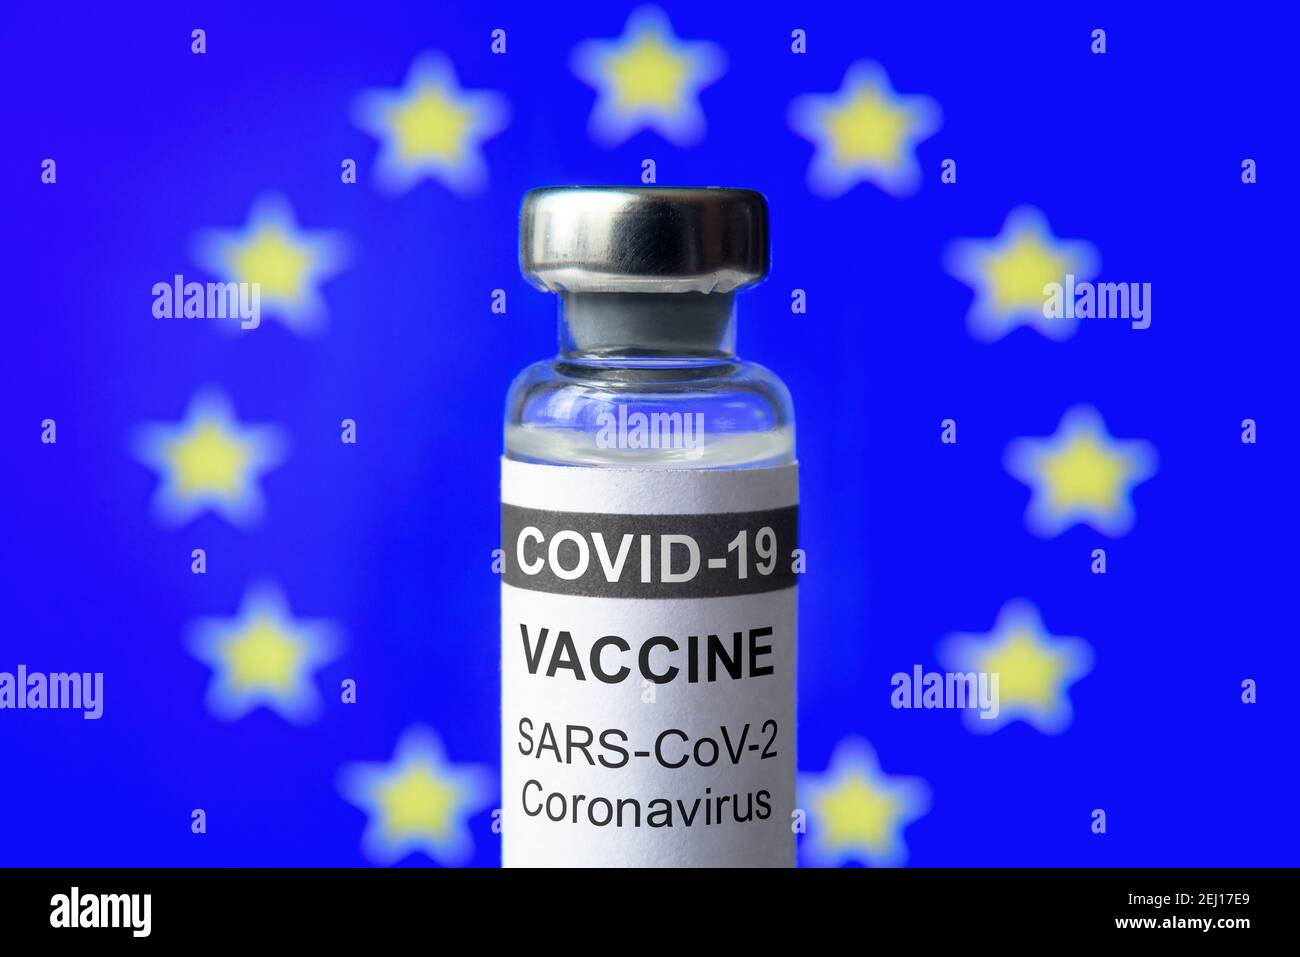 COVID-19 vaccine on EU flag background, bottle with European vaccine for coronavirus close-up. Concept of treatment, clinical trial, distribution and Stock Photo